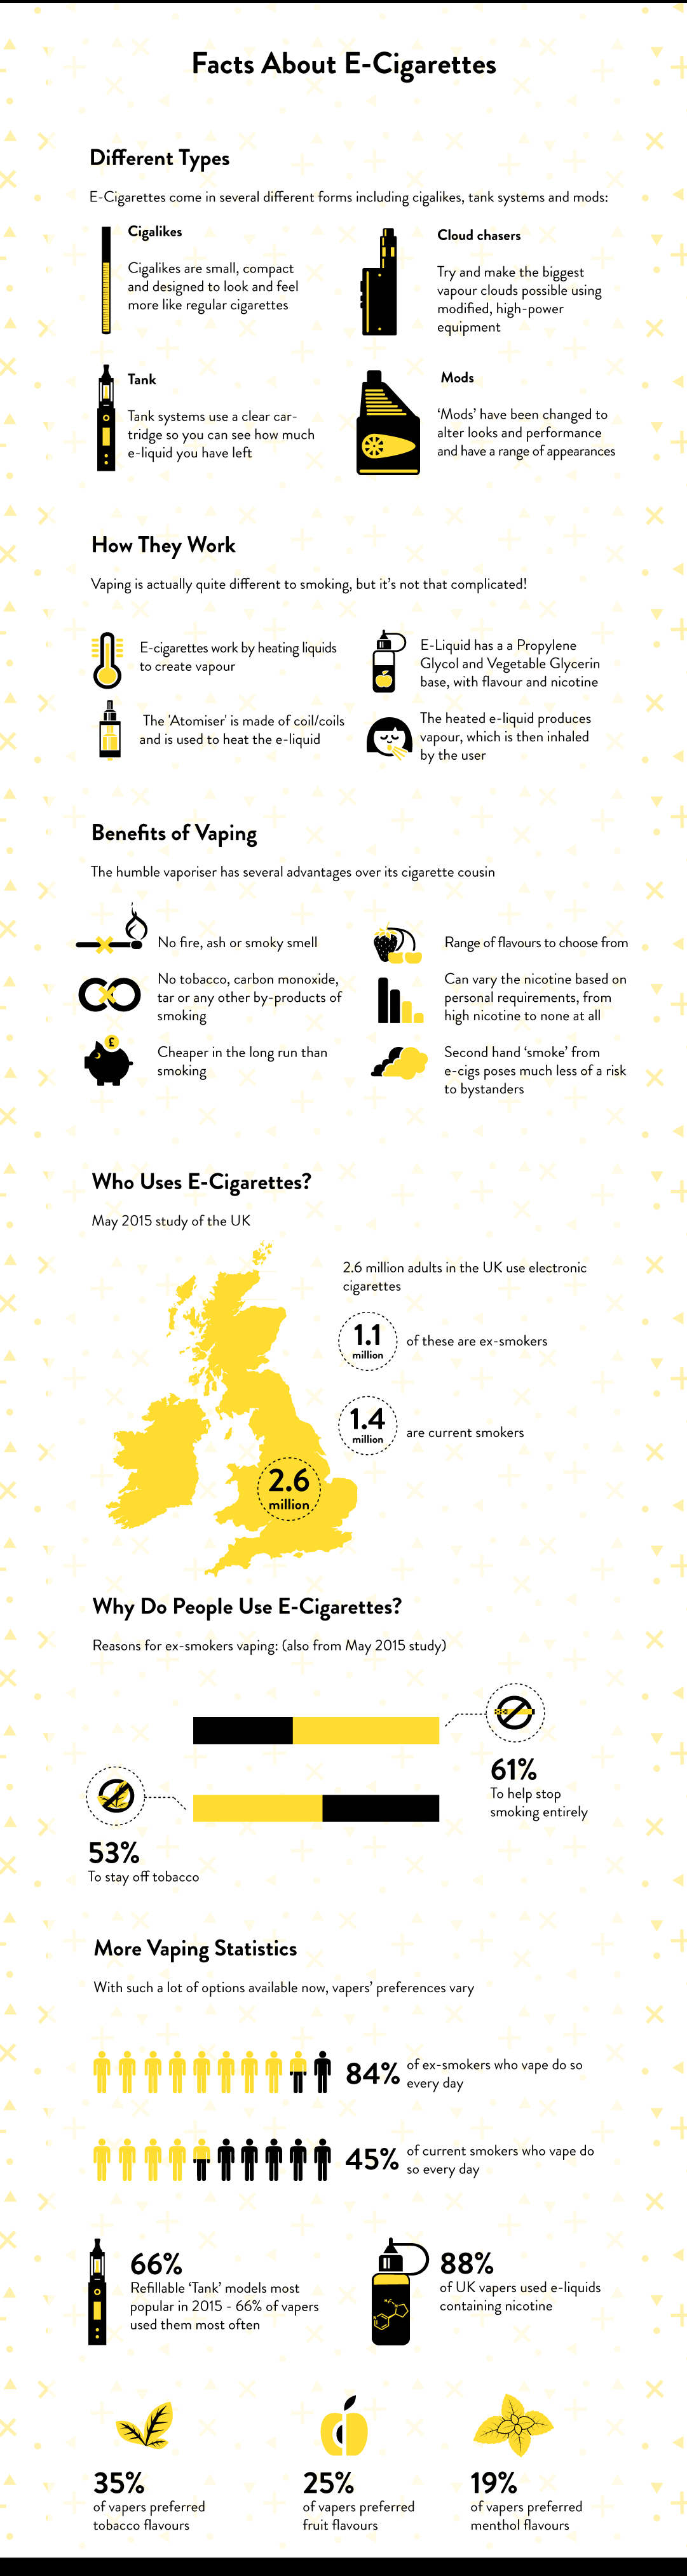 Learn the Facts About E-Cigarettes with Our Helpful Infographic